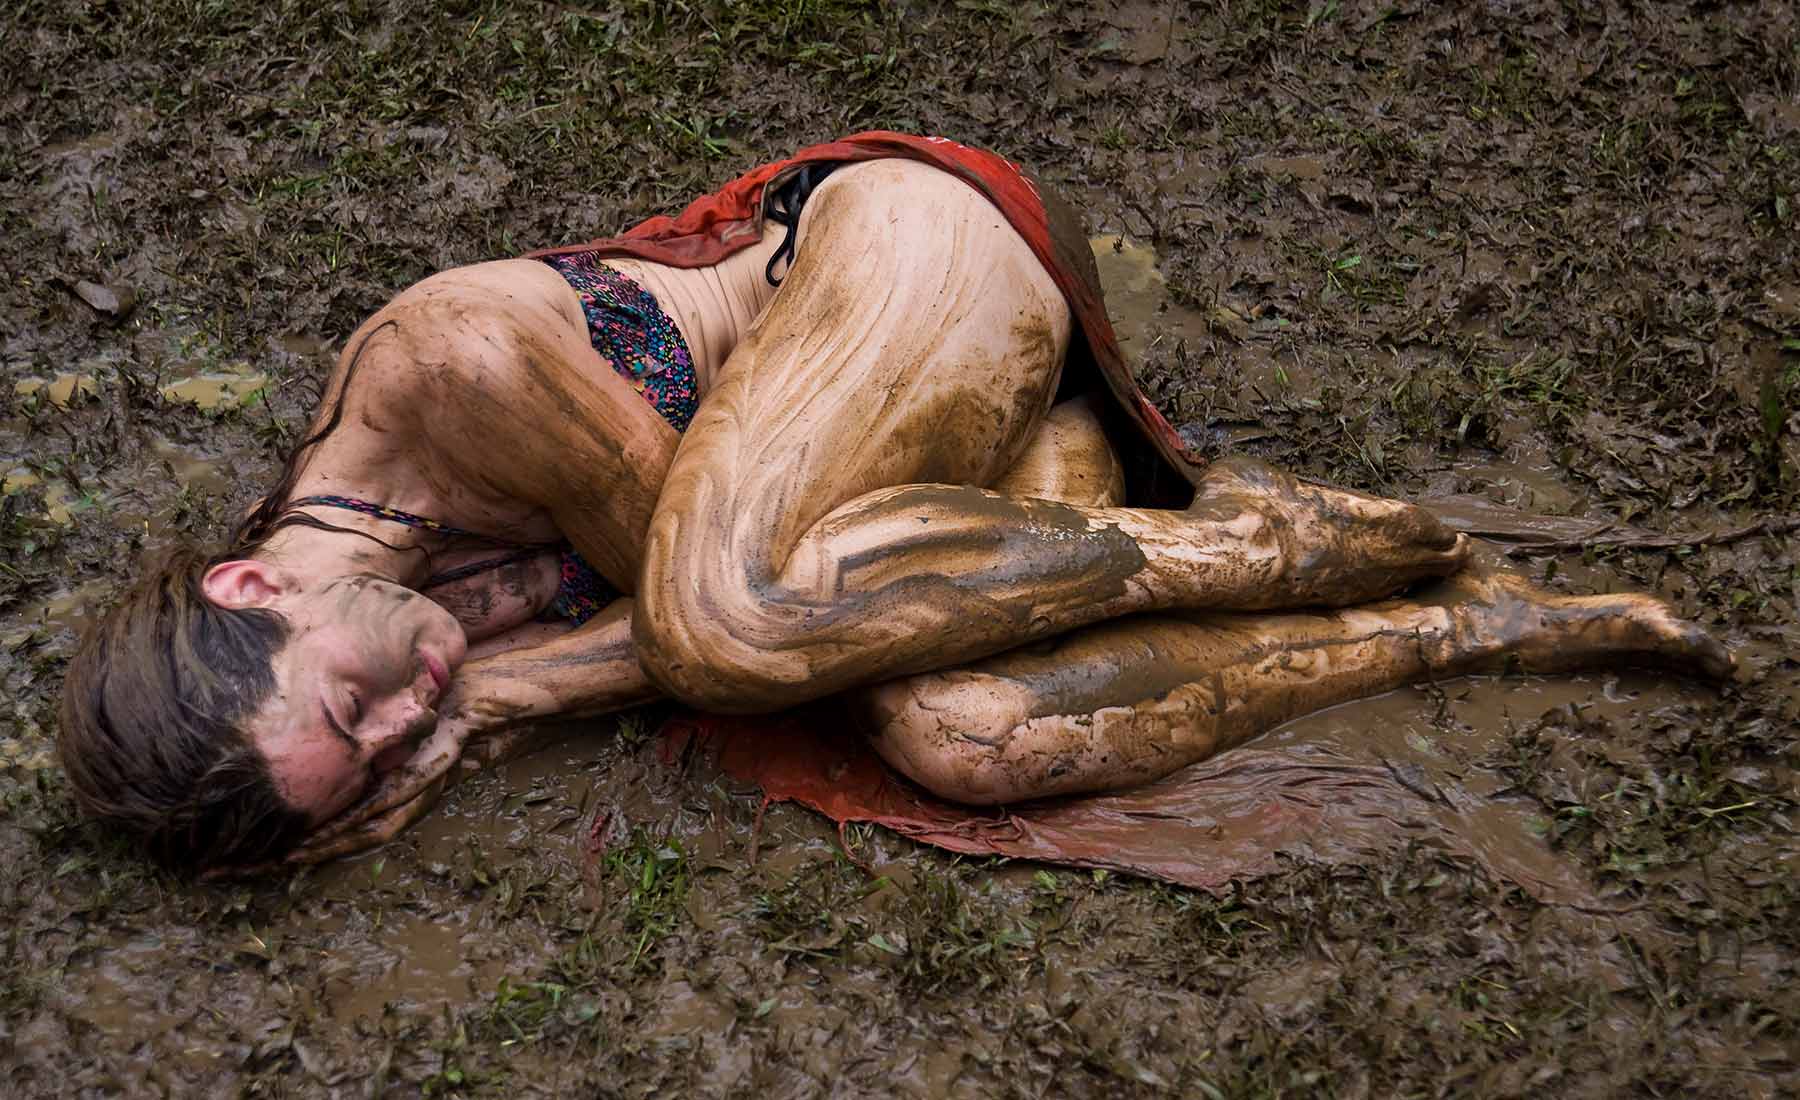 Spiritual Quest - Photo of woman in laying in mud